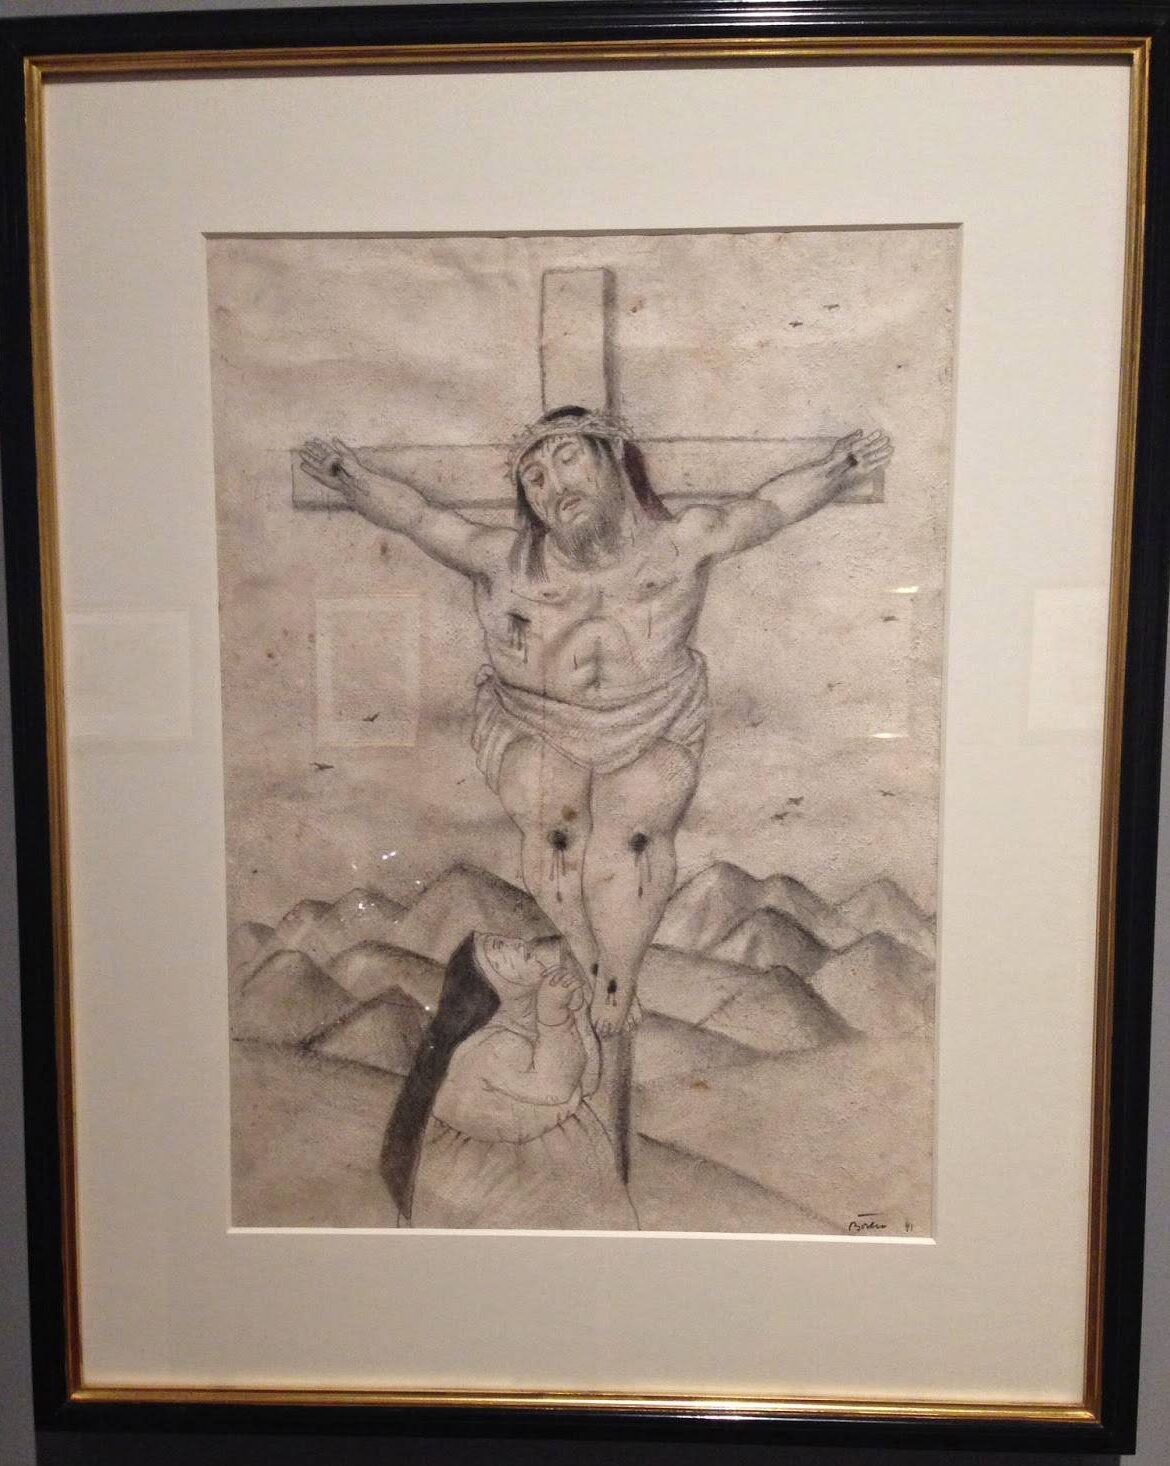 A drawing of Christ by Botero at the Botero Museum in La Candelaria, Bogotá, Colombia